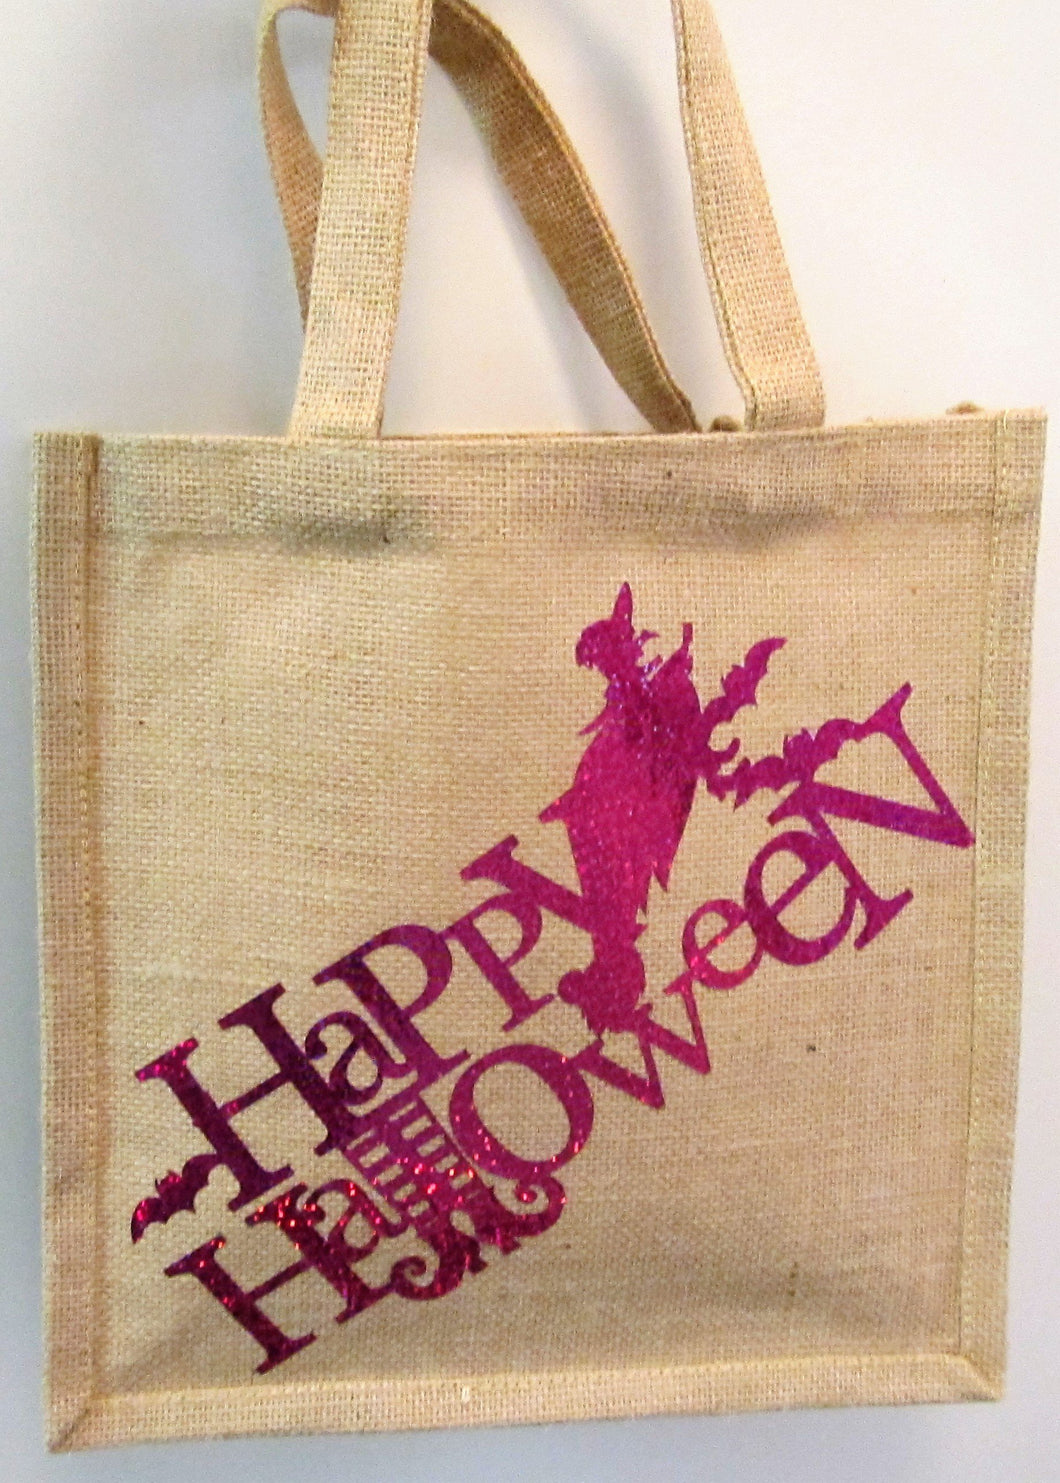 Handcrafted Halloween trick or treat bag in hessian material